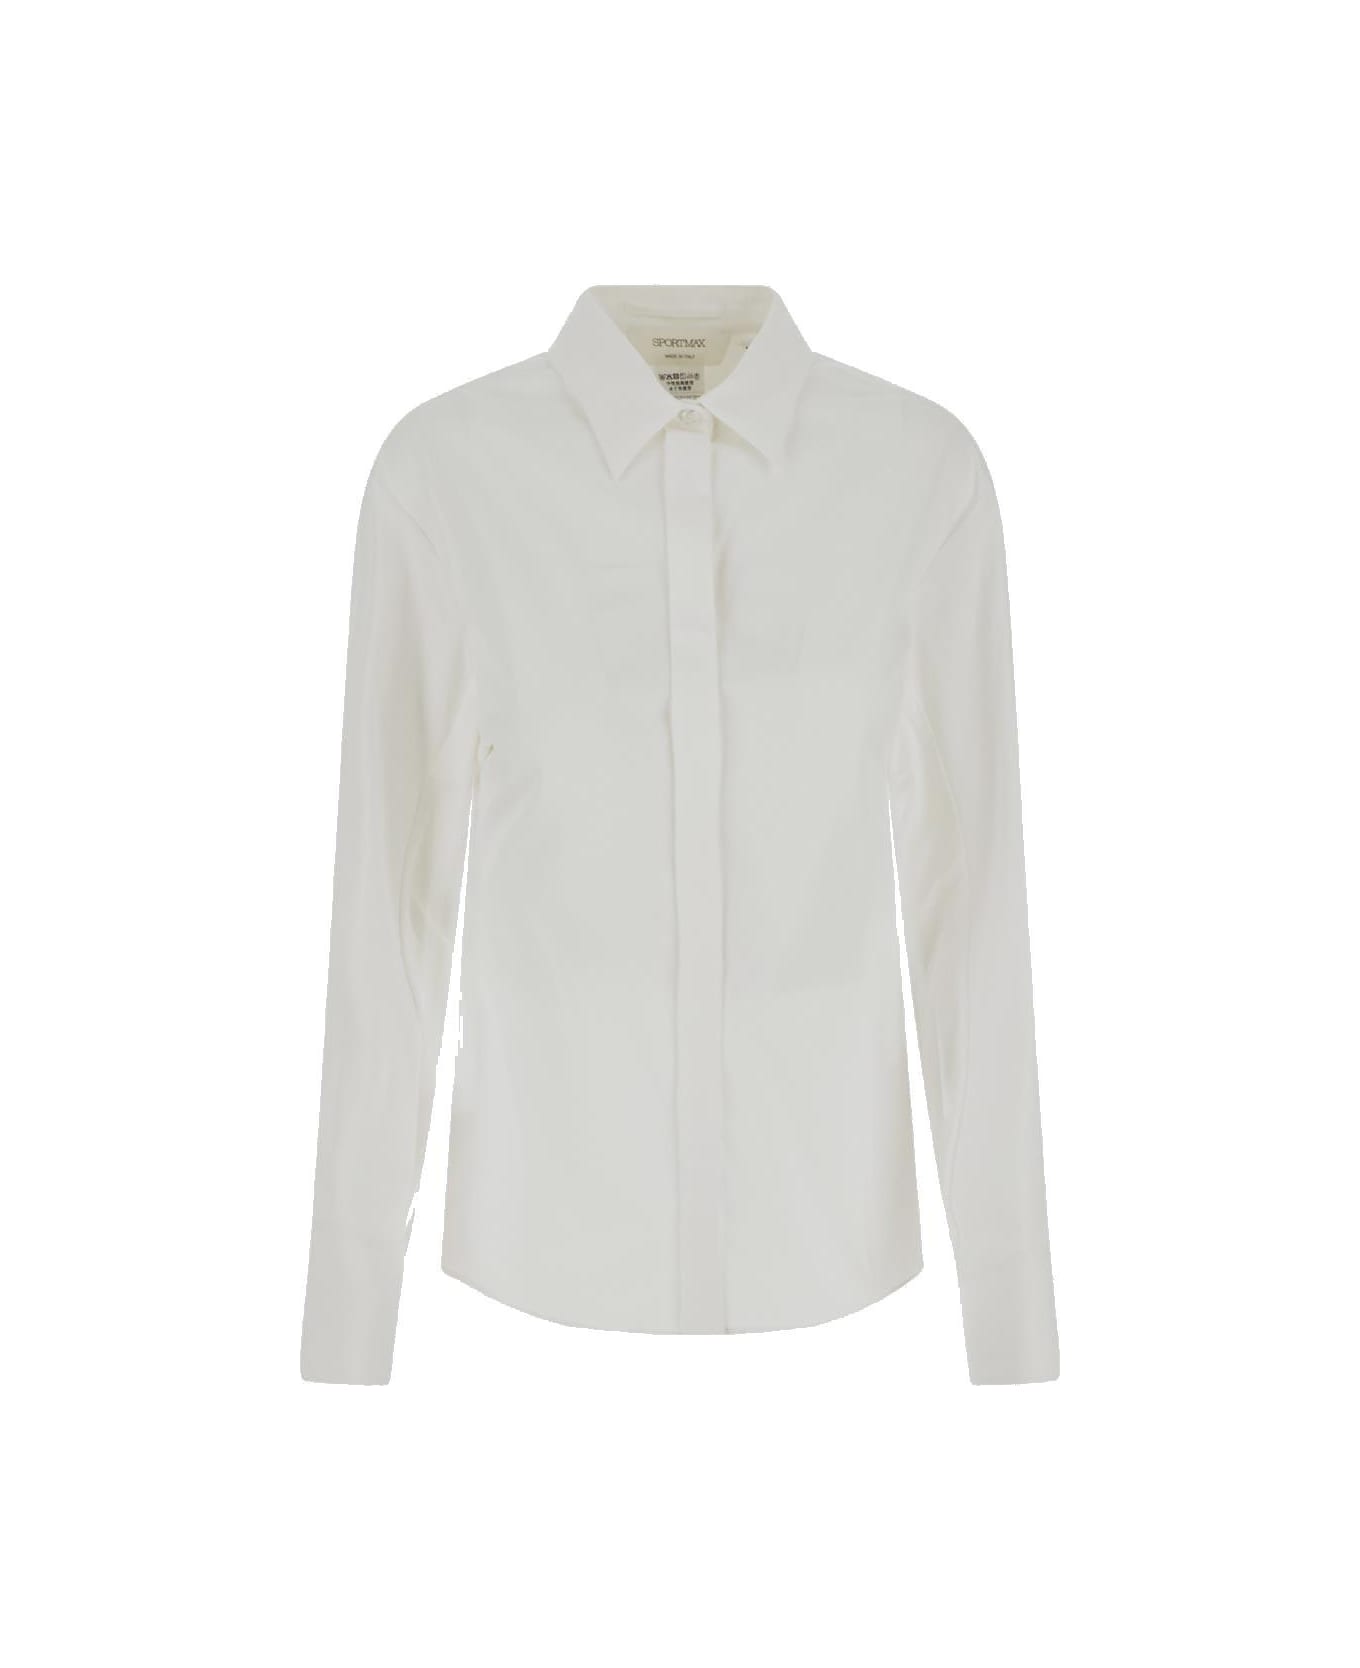 SportMax Button-up Long Sleeved Shirt - WHITE